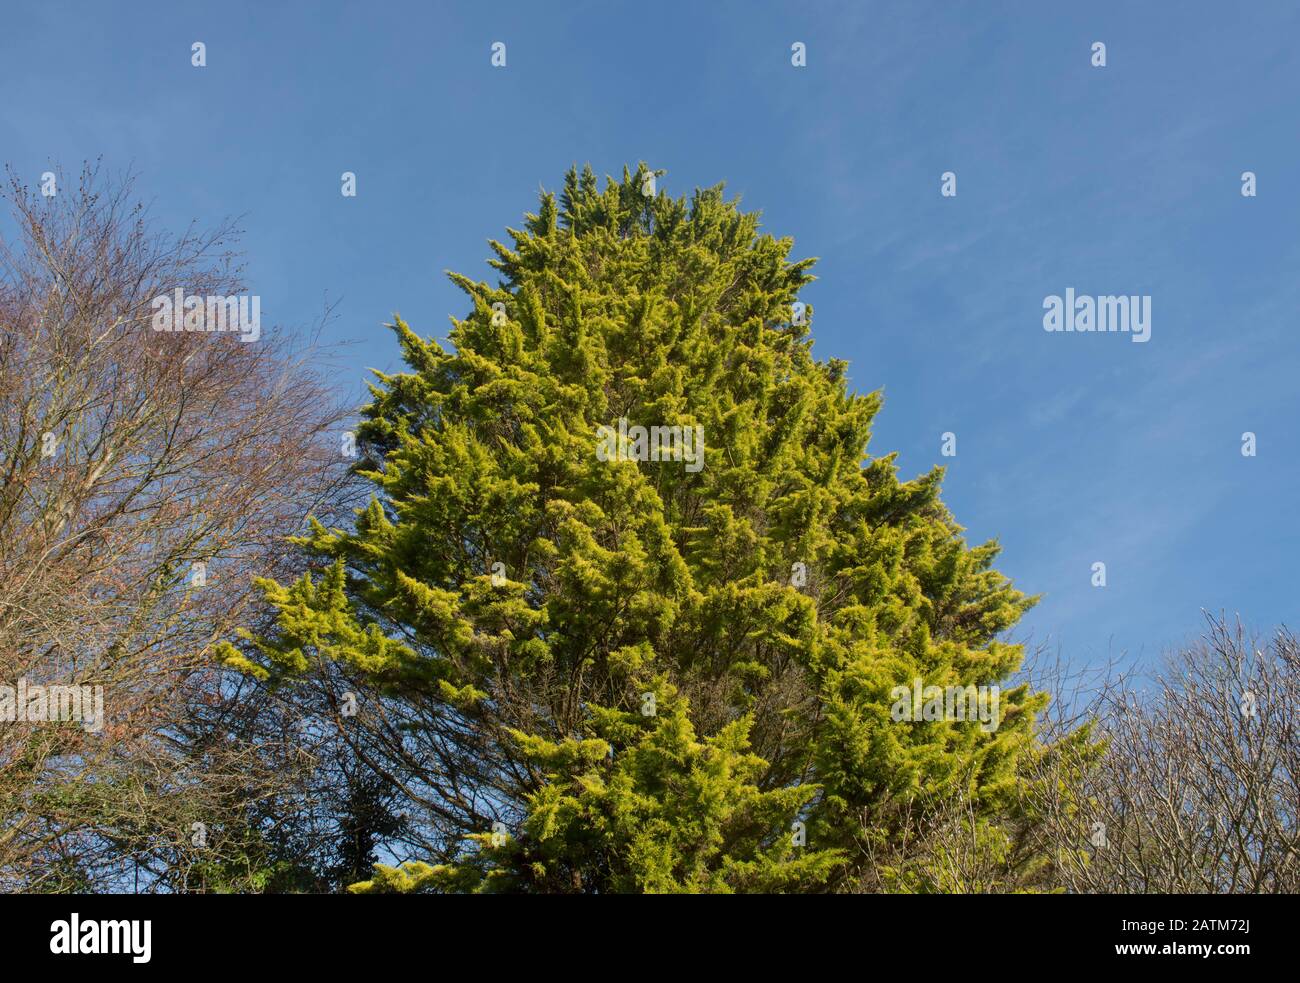 Winter Foliage of an Evergreen Monterey Cypress Tree (Cupressus macrocarpa 'Goldspire') with a Blue Sky Background in a Garden in. Devon, England, UK Stock Photo